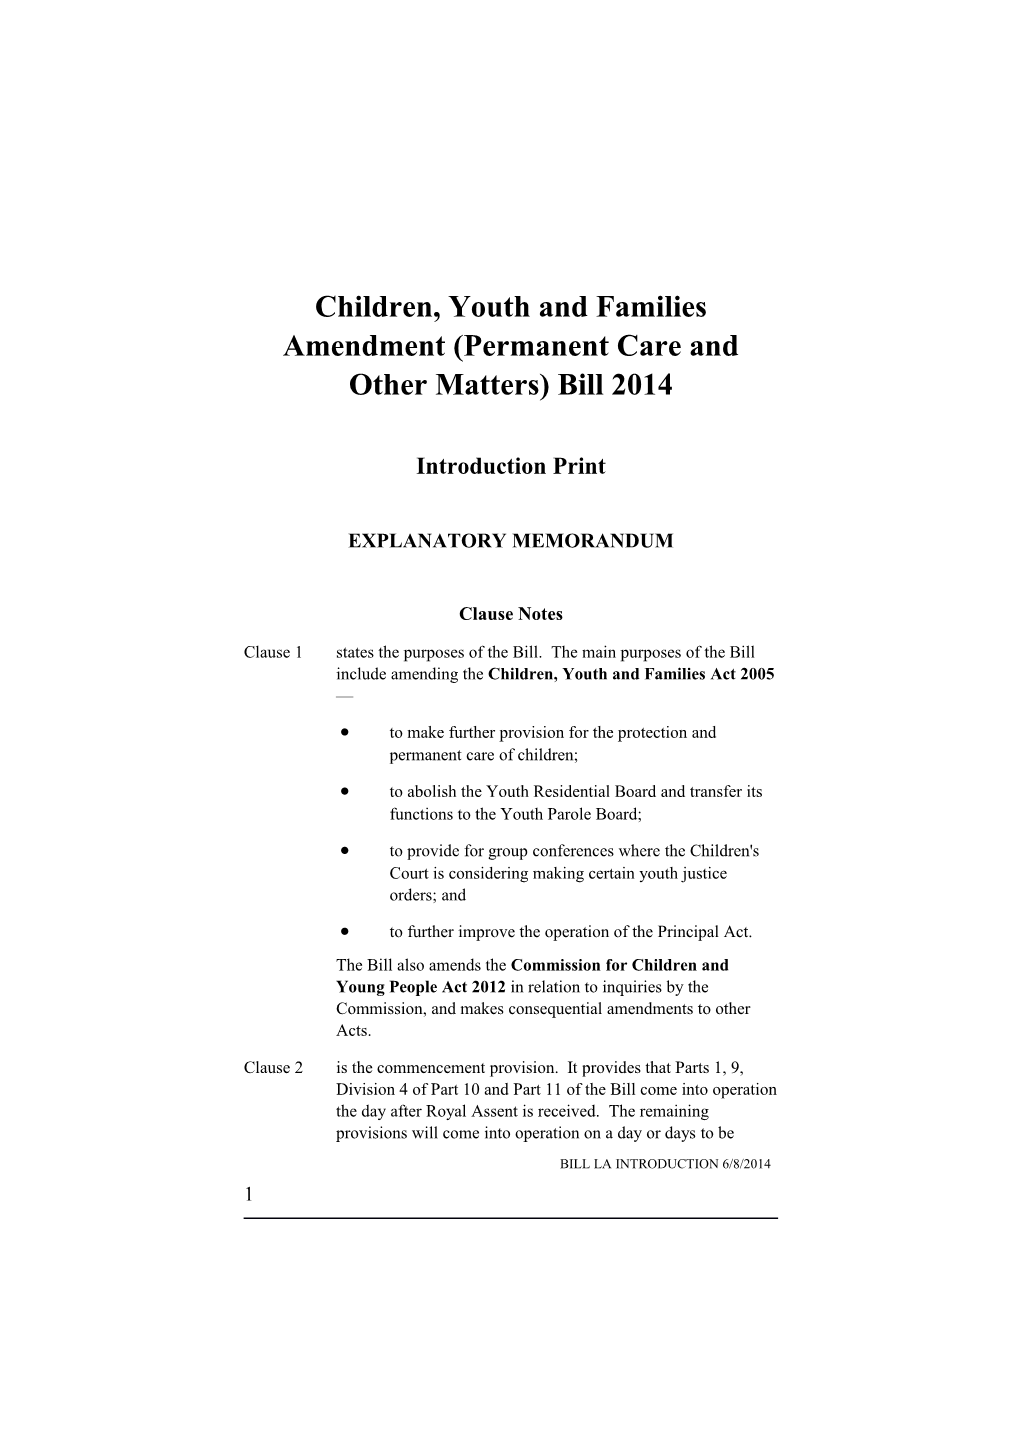 Children, Youth and Families Amendment (Permanent Care and Other Matters) Bill 2014